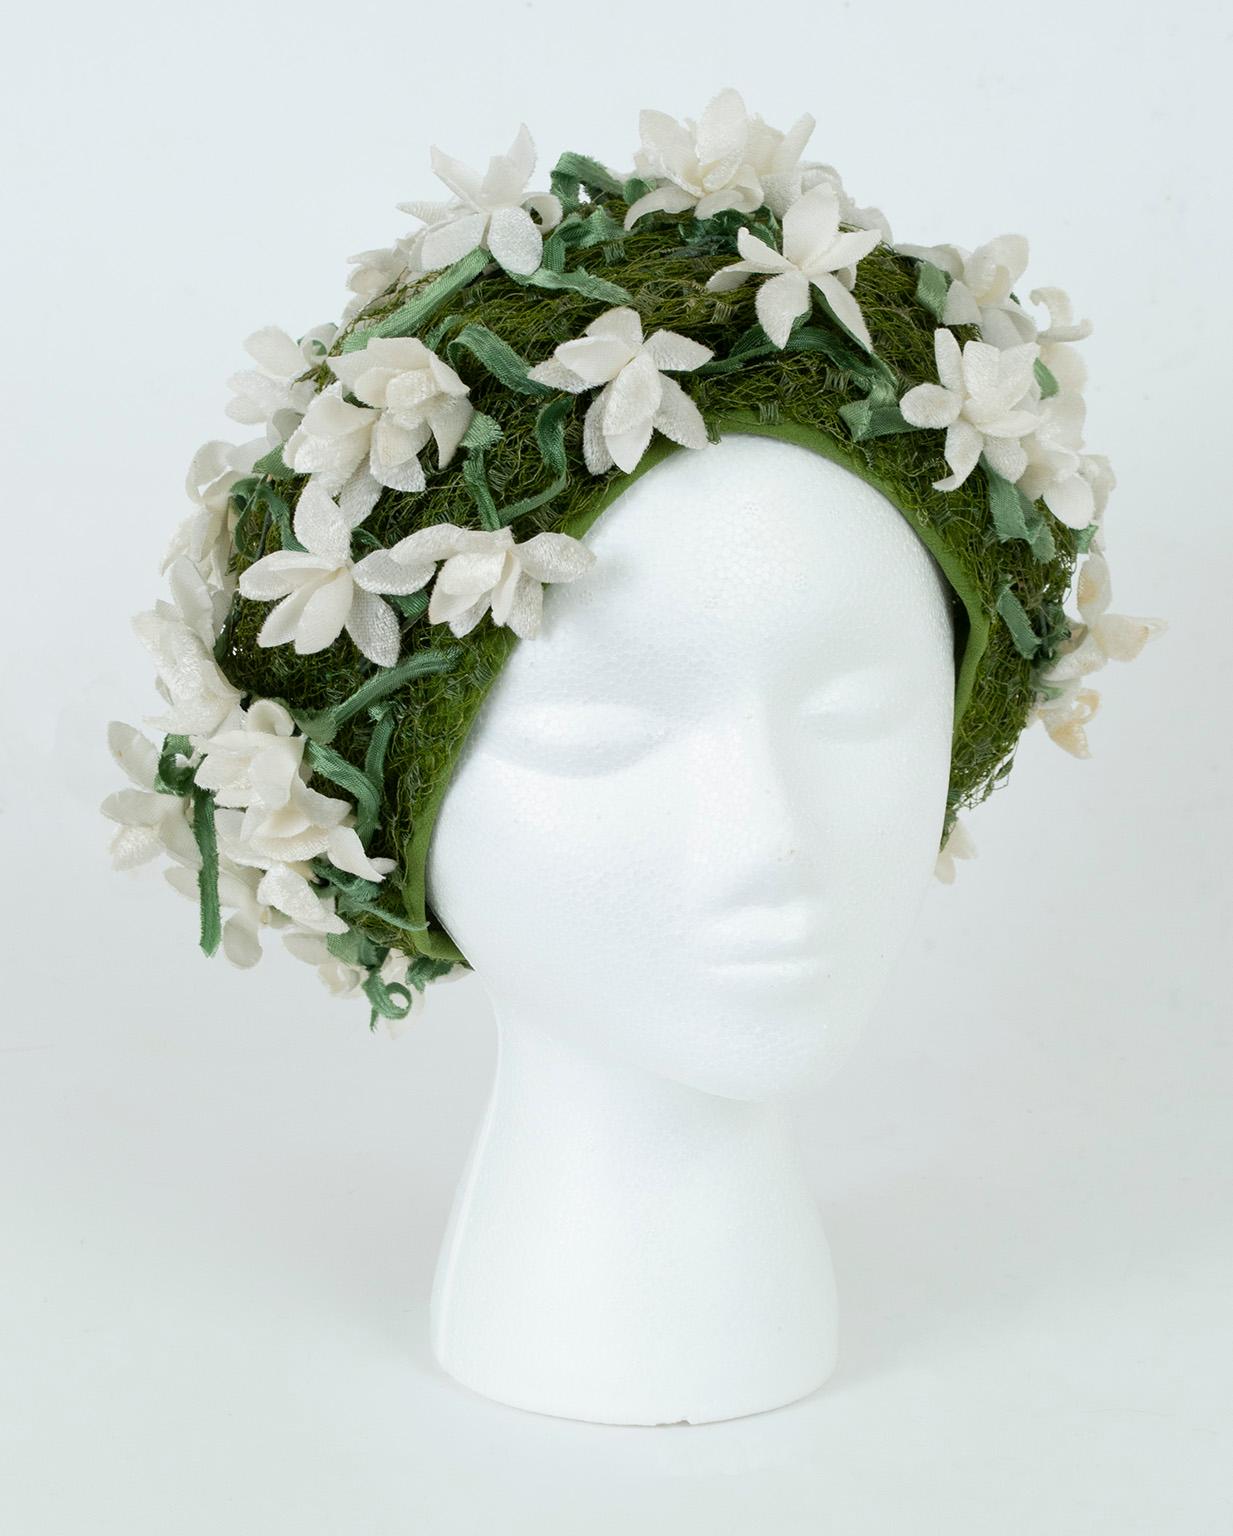 A dream accessory, this unbelievable Dior hat uses green silk and veiling to simulate a ground of grass, while articulated silk velvet gardenias and leaves cover its surface. Replete with texture and dimension, its dramatic silhouette, color and